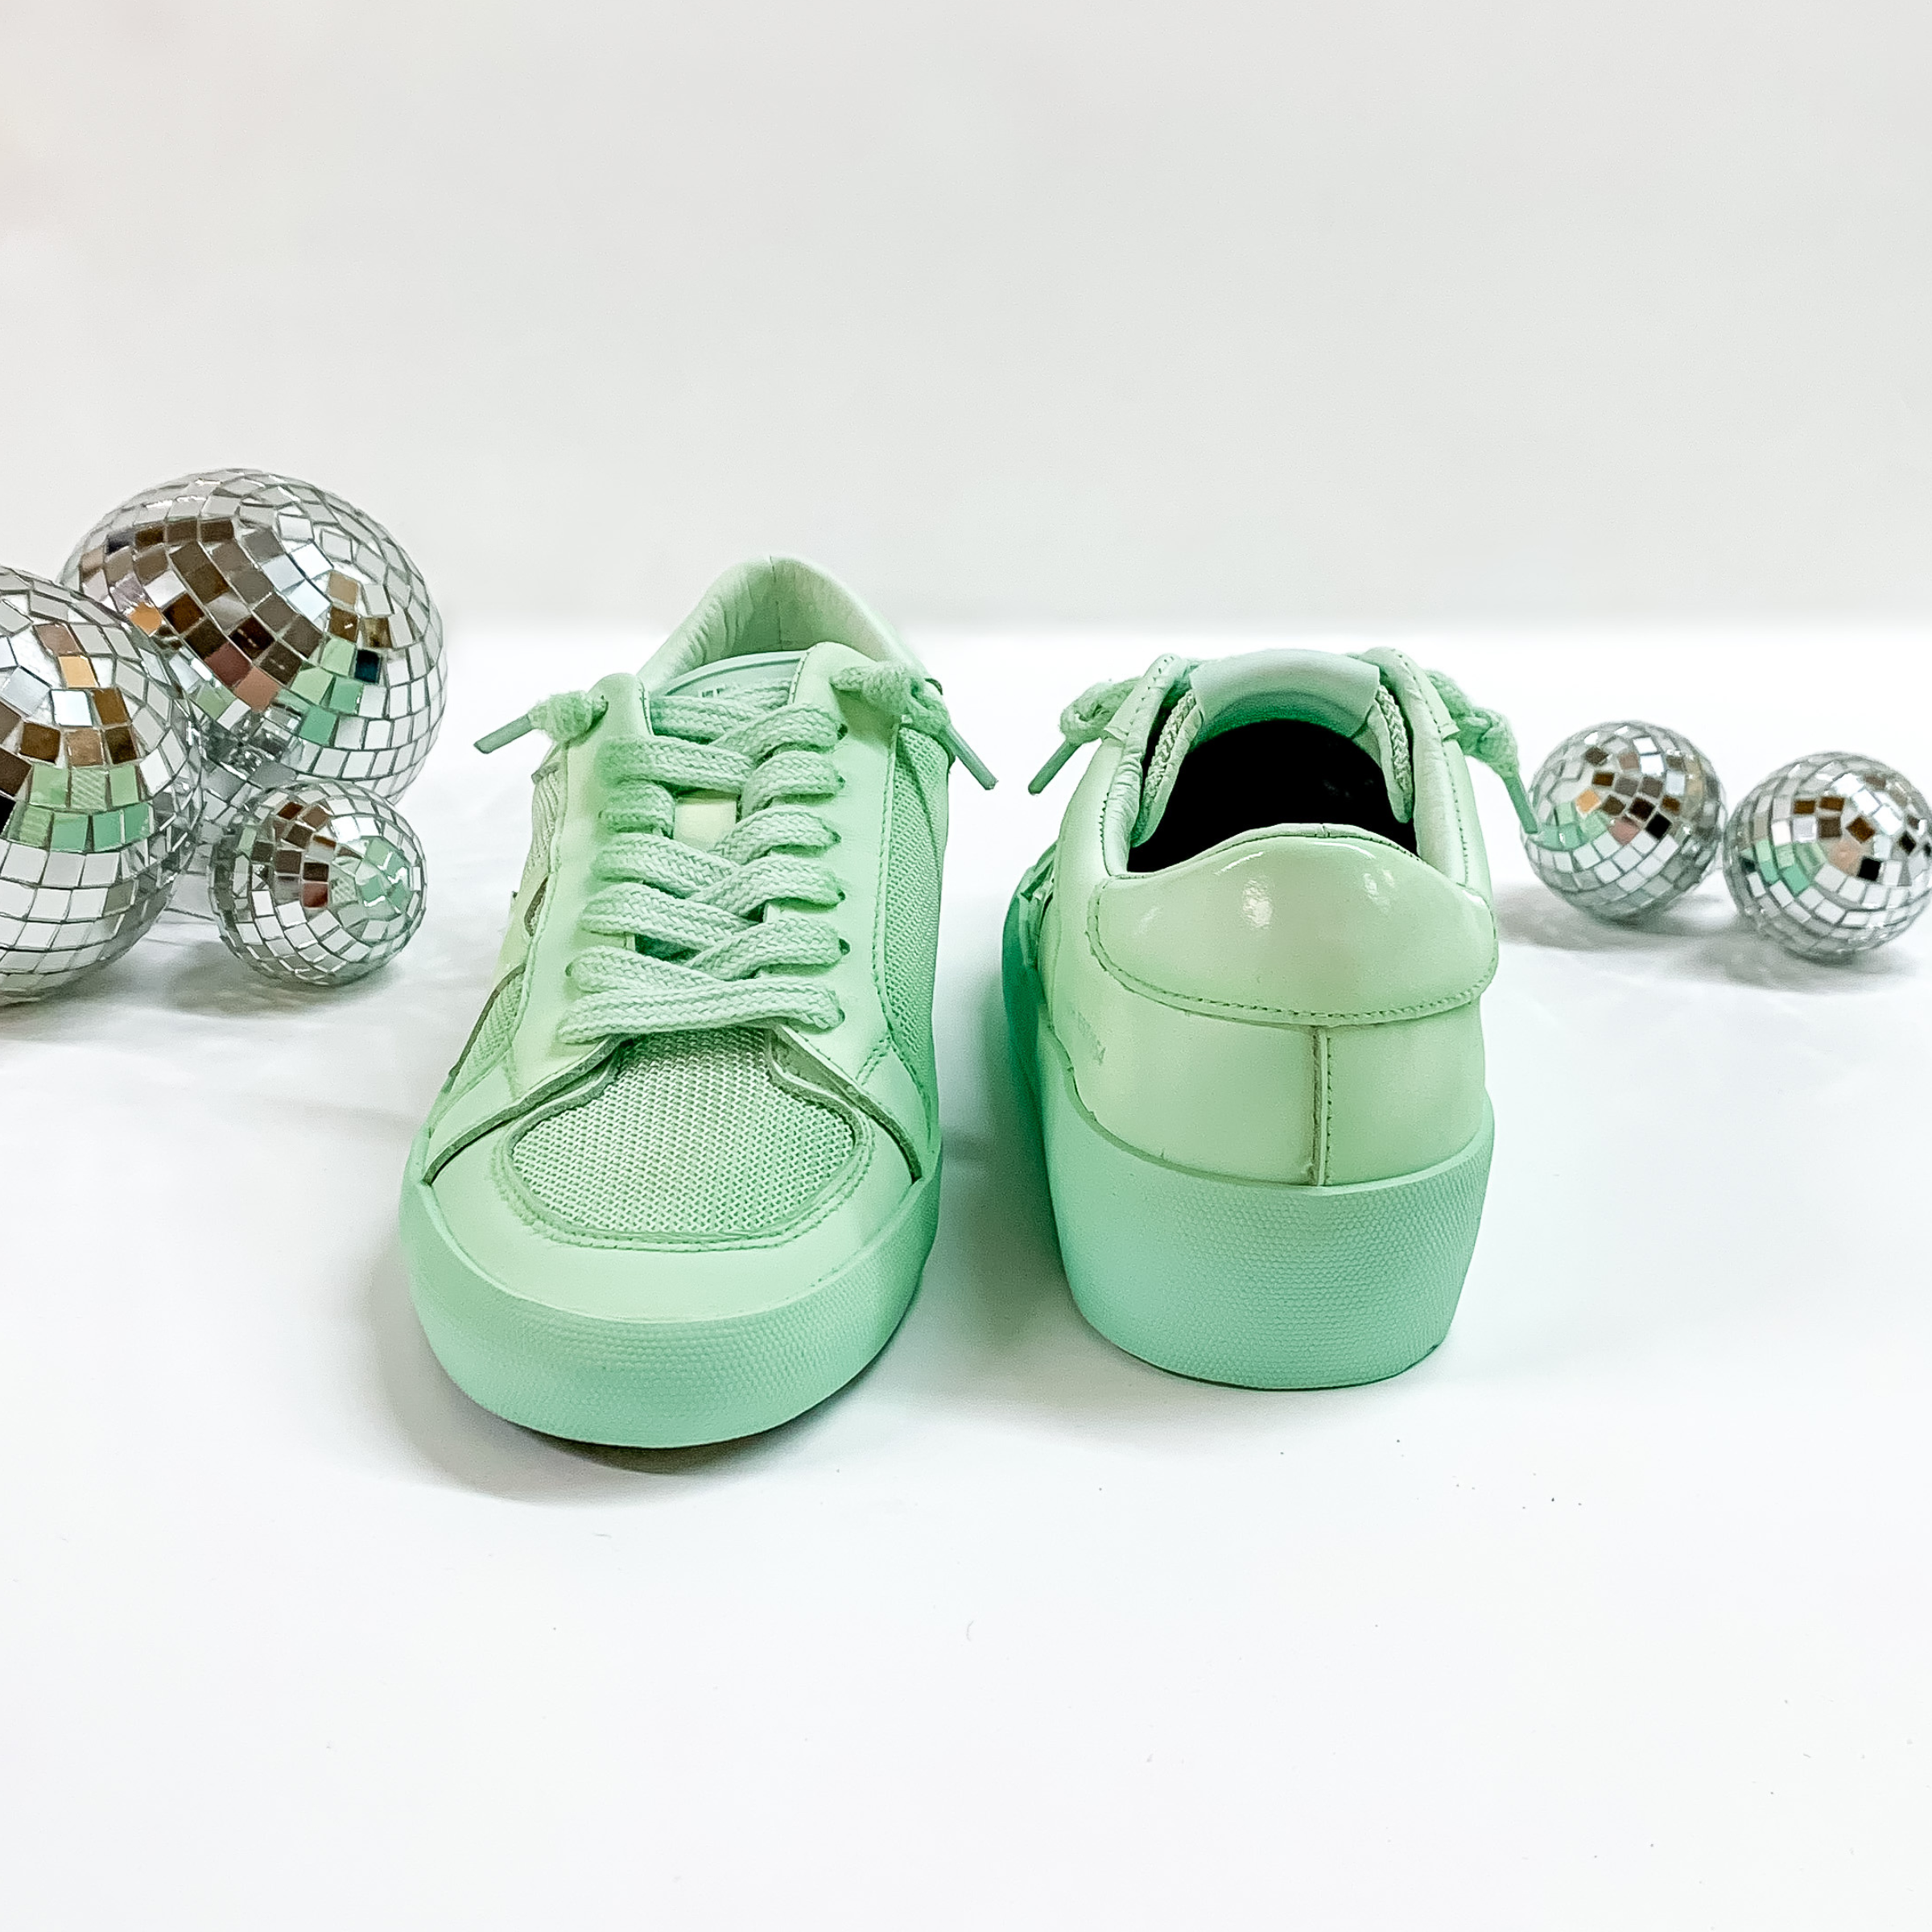 Vintage Havana | Extra Dip Dye Sneakers in Mint - Giddy Up Glamour Boutique